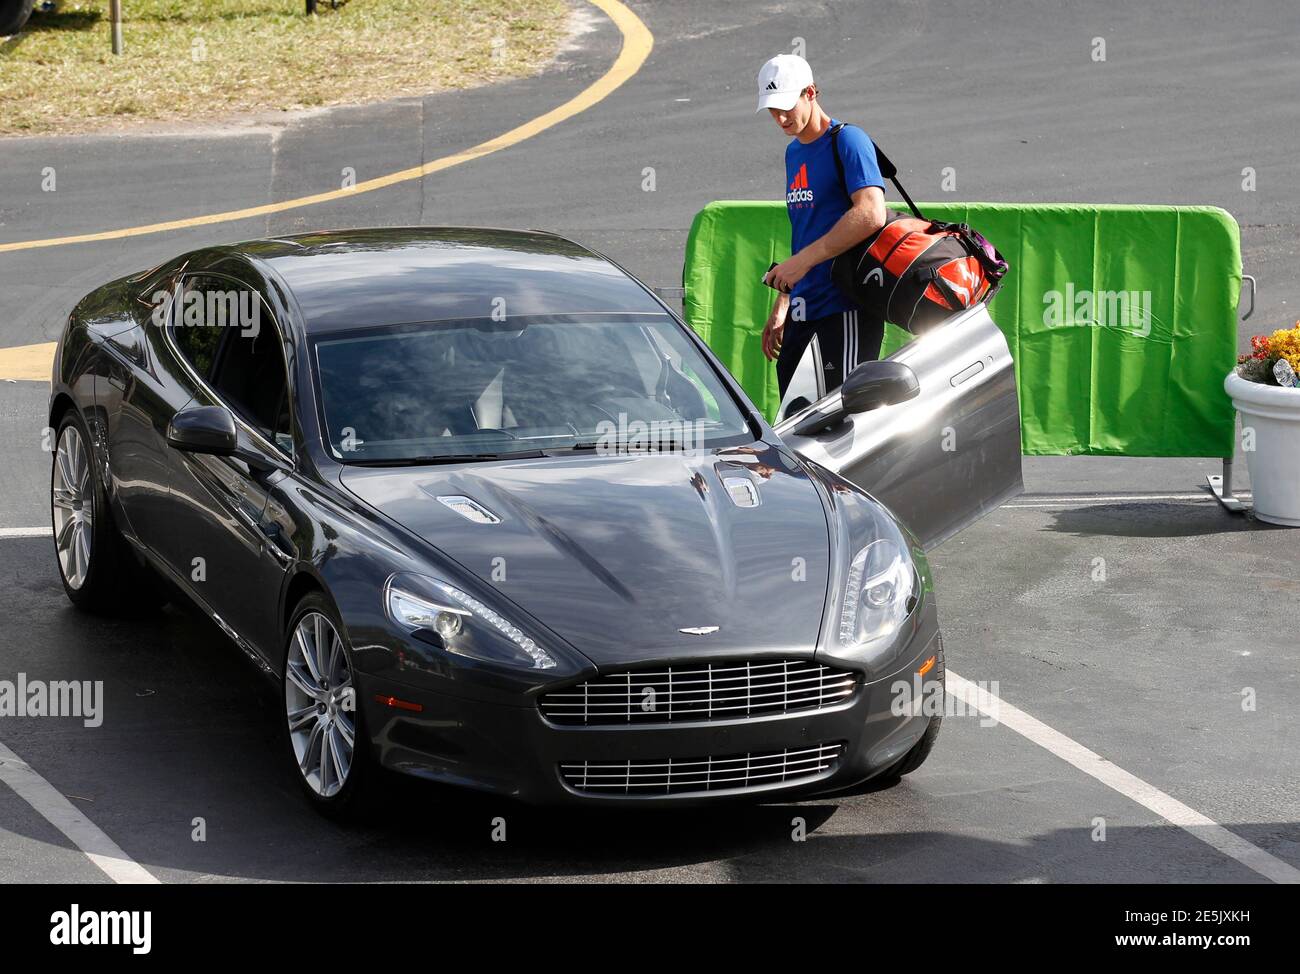 British tennis player Andy Murray gets into an Aston Martin at the Sony Ericsson Open tennis tournament in Key Biscayne, Florida March 20, 2012.  REUTERS/Kevin Lamarque  (UNITED STATES - Tags: SPORT TENNIS TRANSPORT) Stock Photo